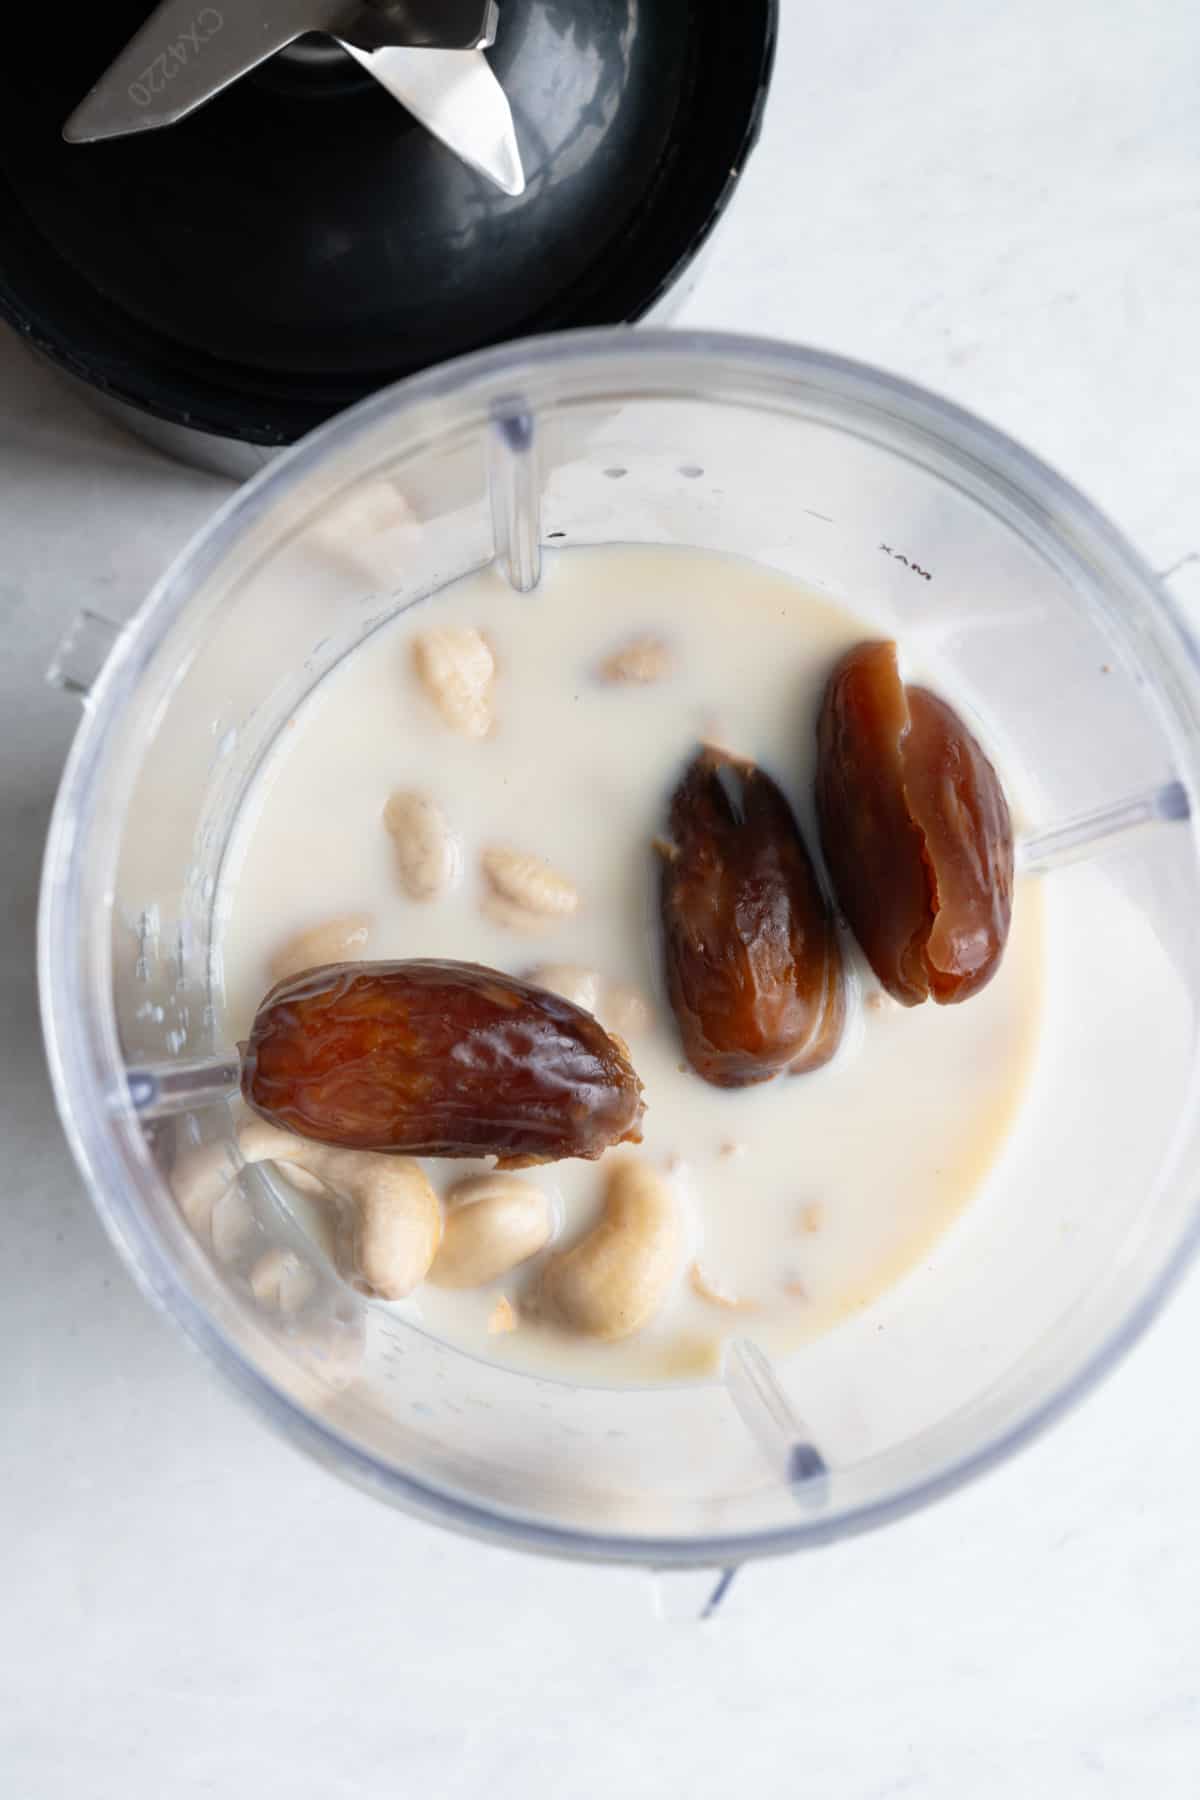 Dates, cashews, soy milk, and pecans in the canister of a blender.